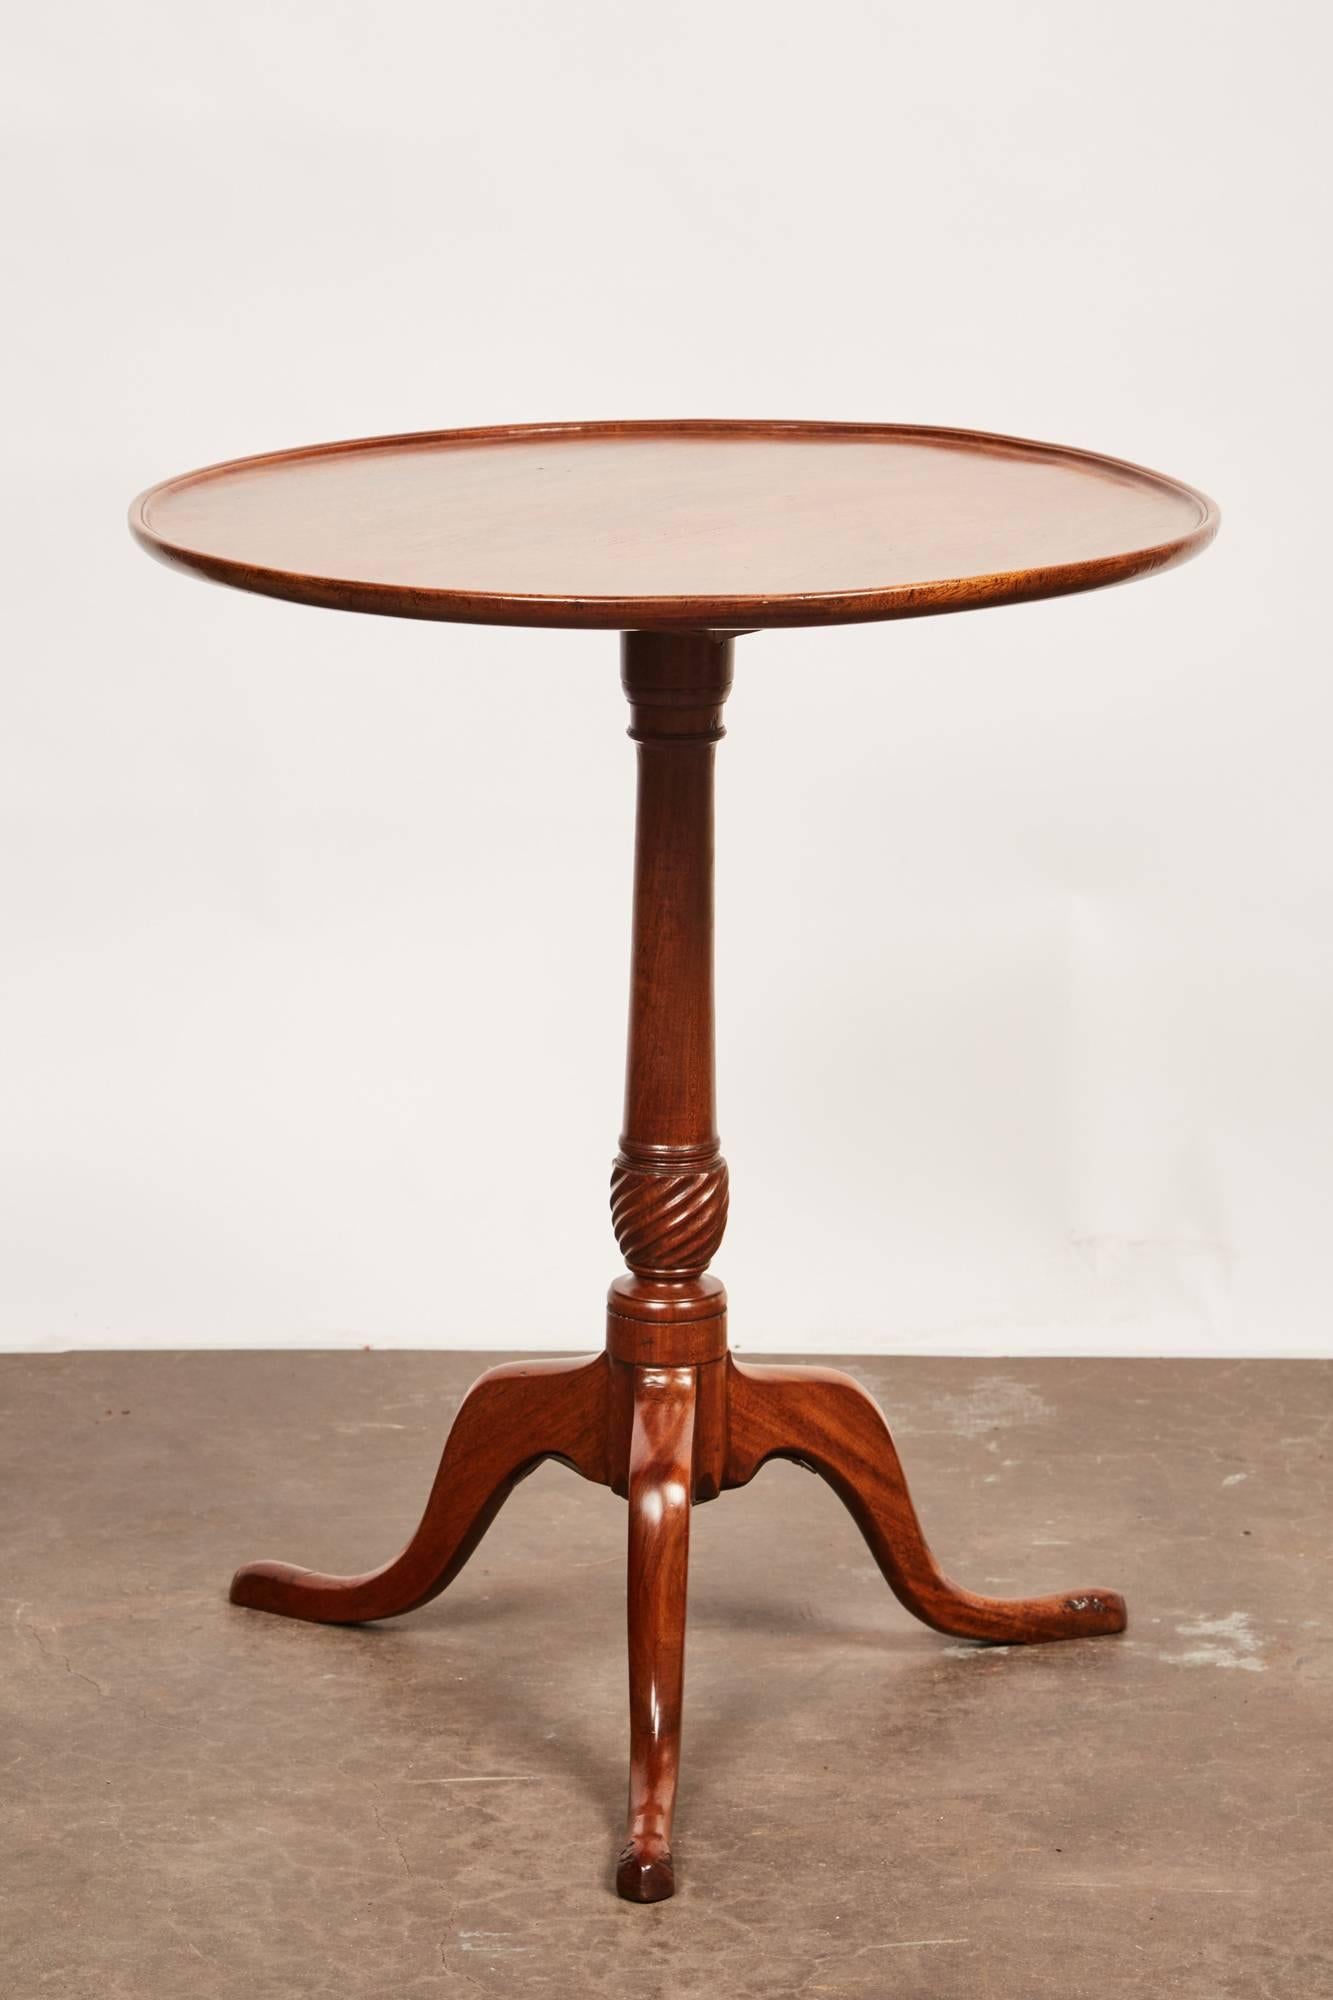 This late 18th century George III mahogany side pedestal table features a molded dished circular top above a turned and carved baluster shaft, on a set of three cabriole legs and padded feet. The top is a single piece of mahogany.